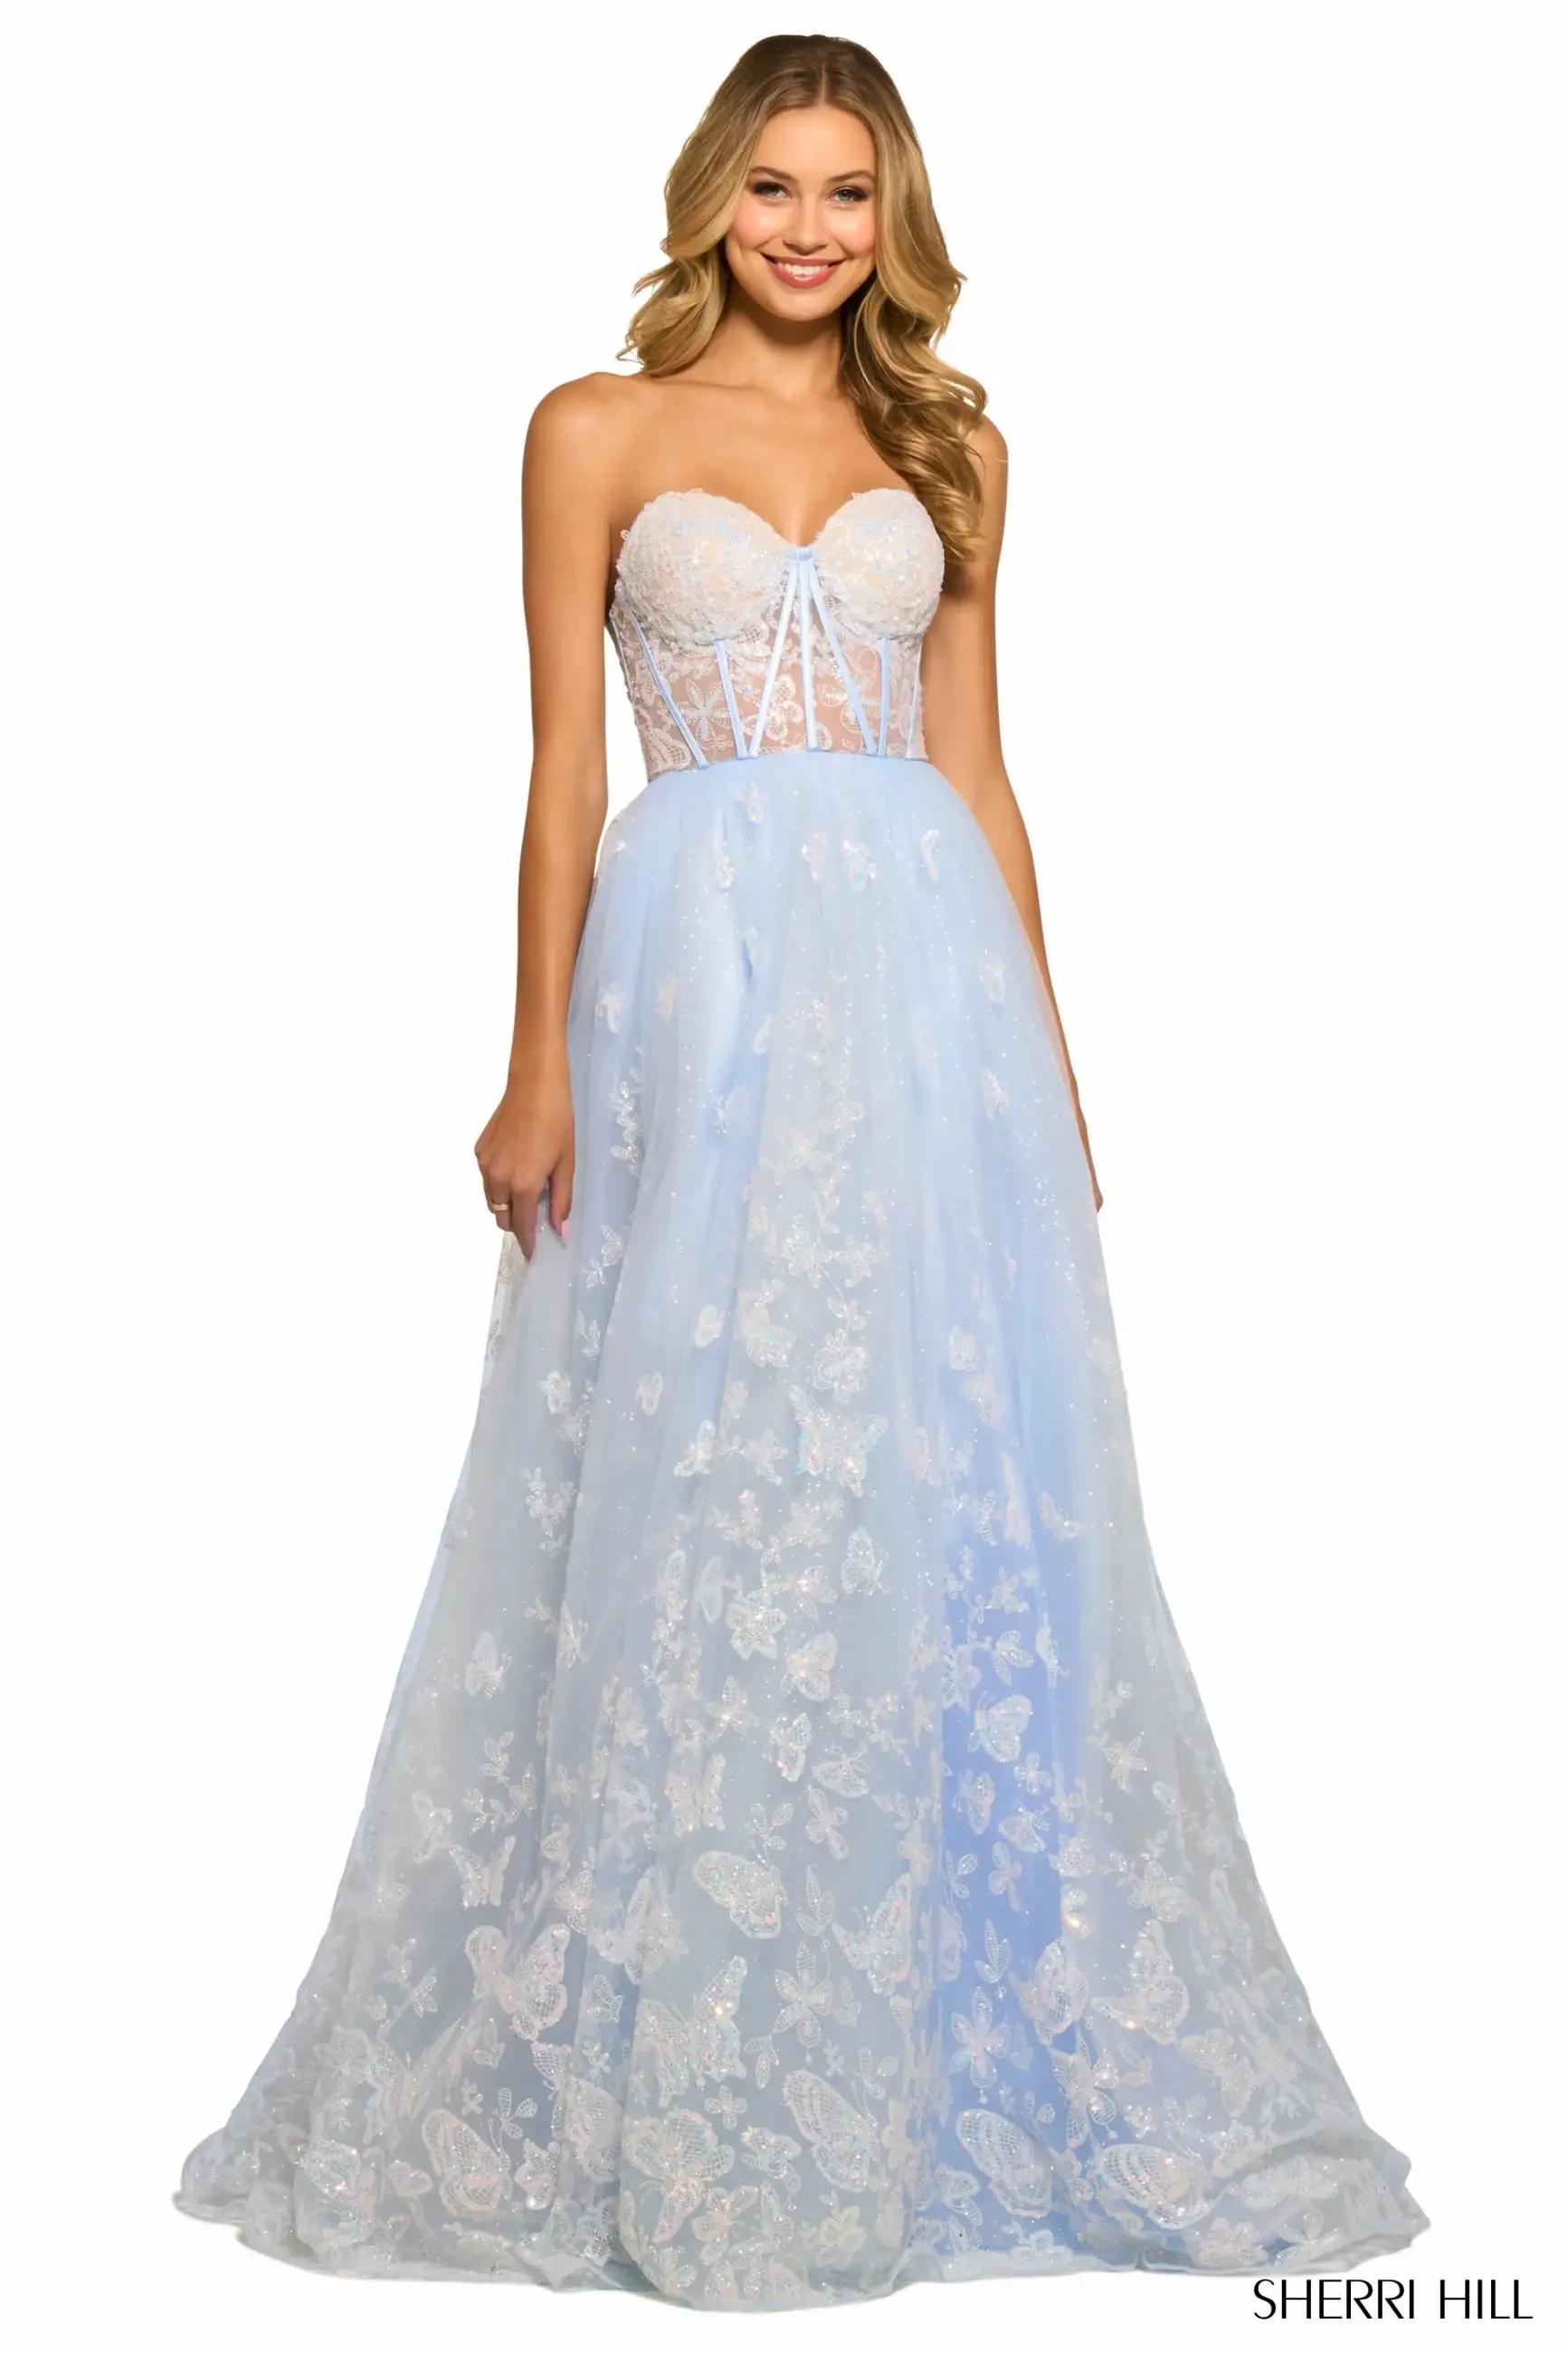 Prom Dresses To Suit The Spring Aesthetic! Image